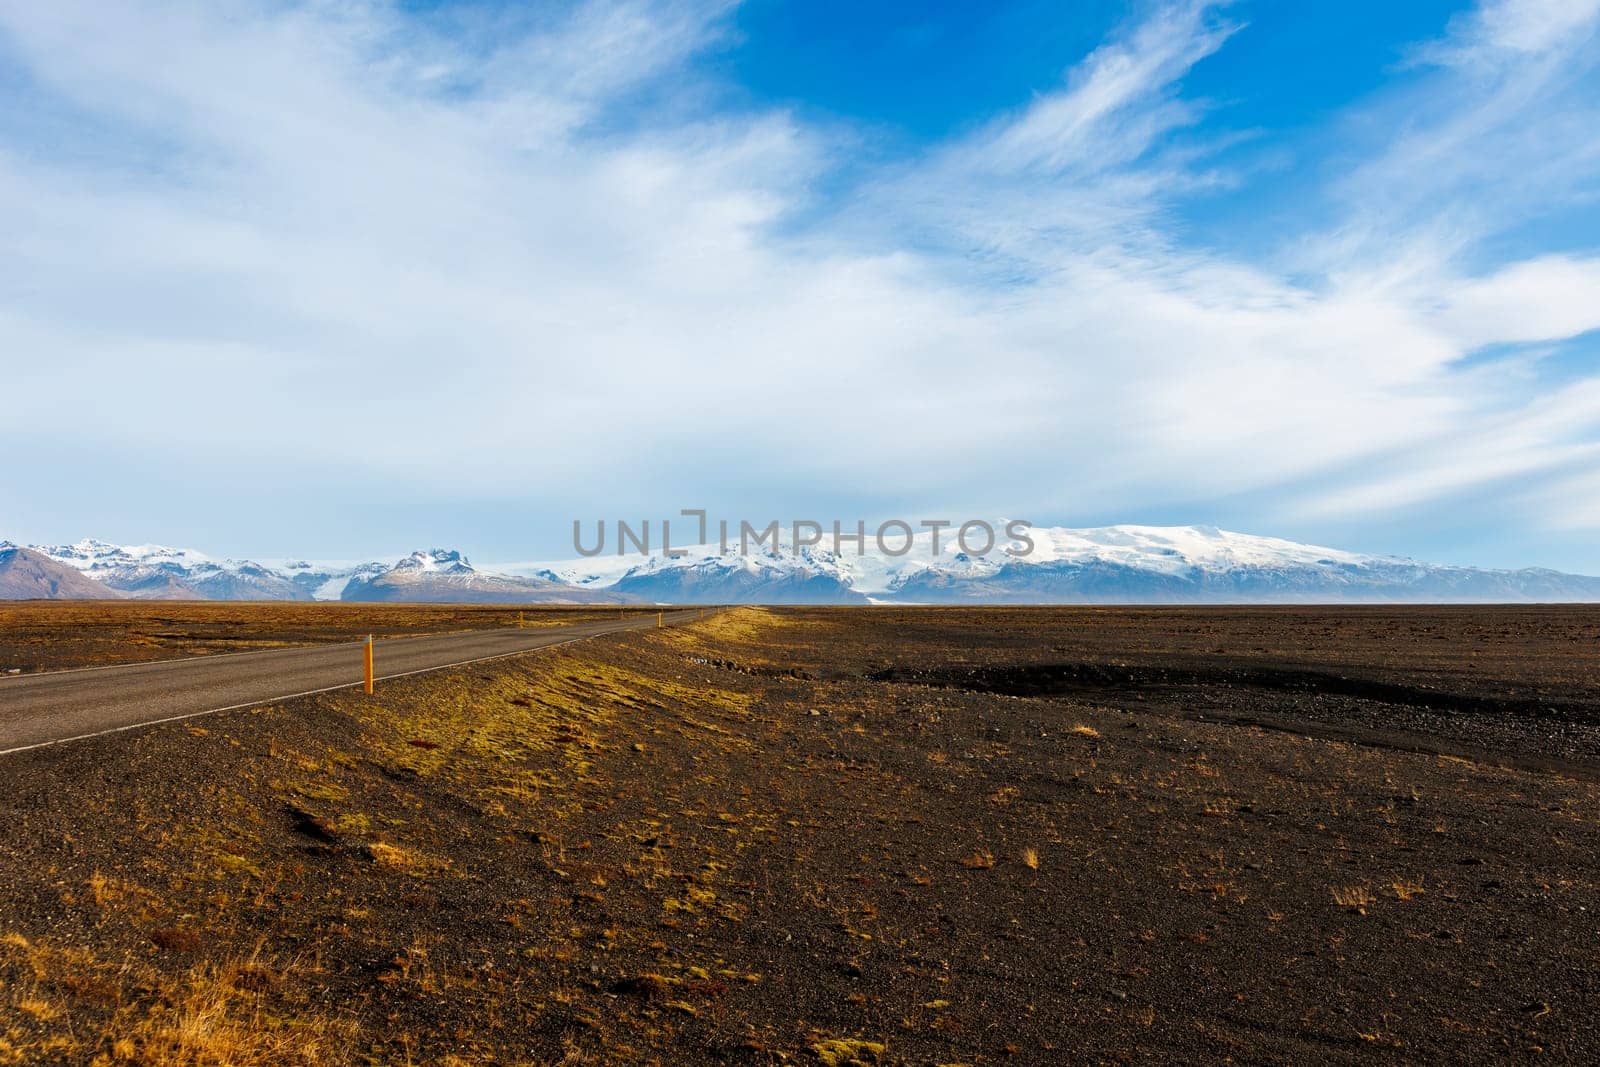 Beautiful icelandic highland scenery wuth snowy mountain peaks and bown frozen fields, scandinavian setting. Nordic landscape with hills and lands in iceland, scenic route roadside.